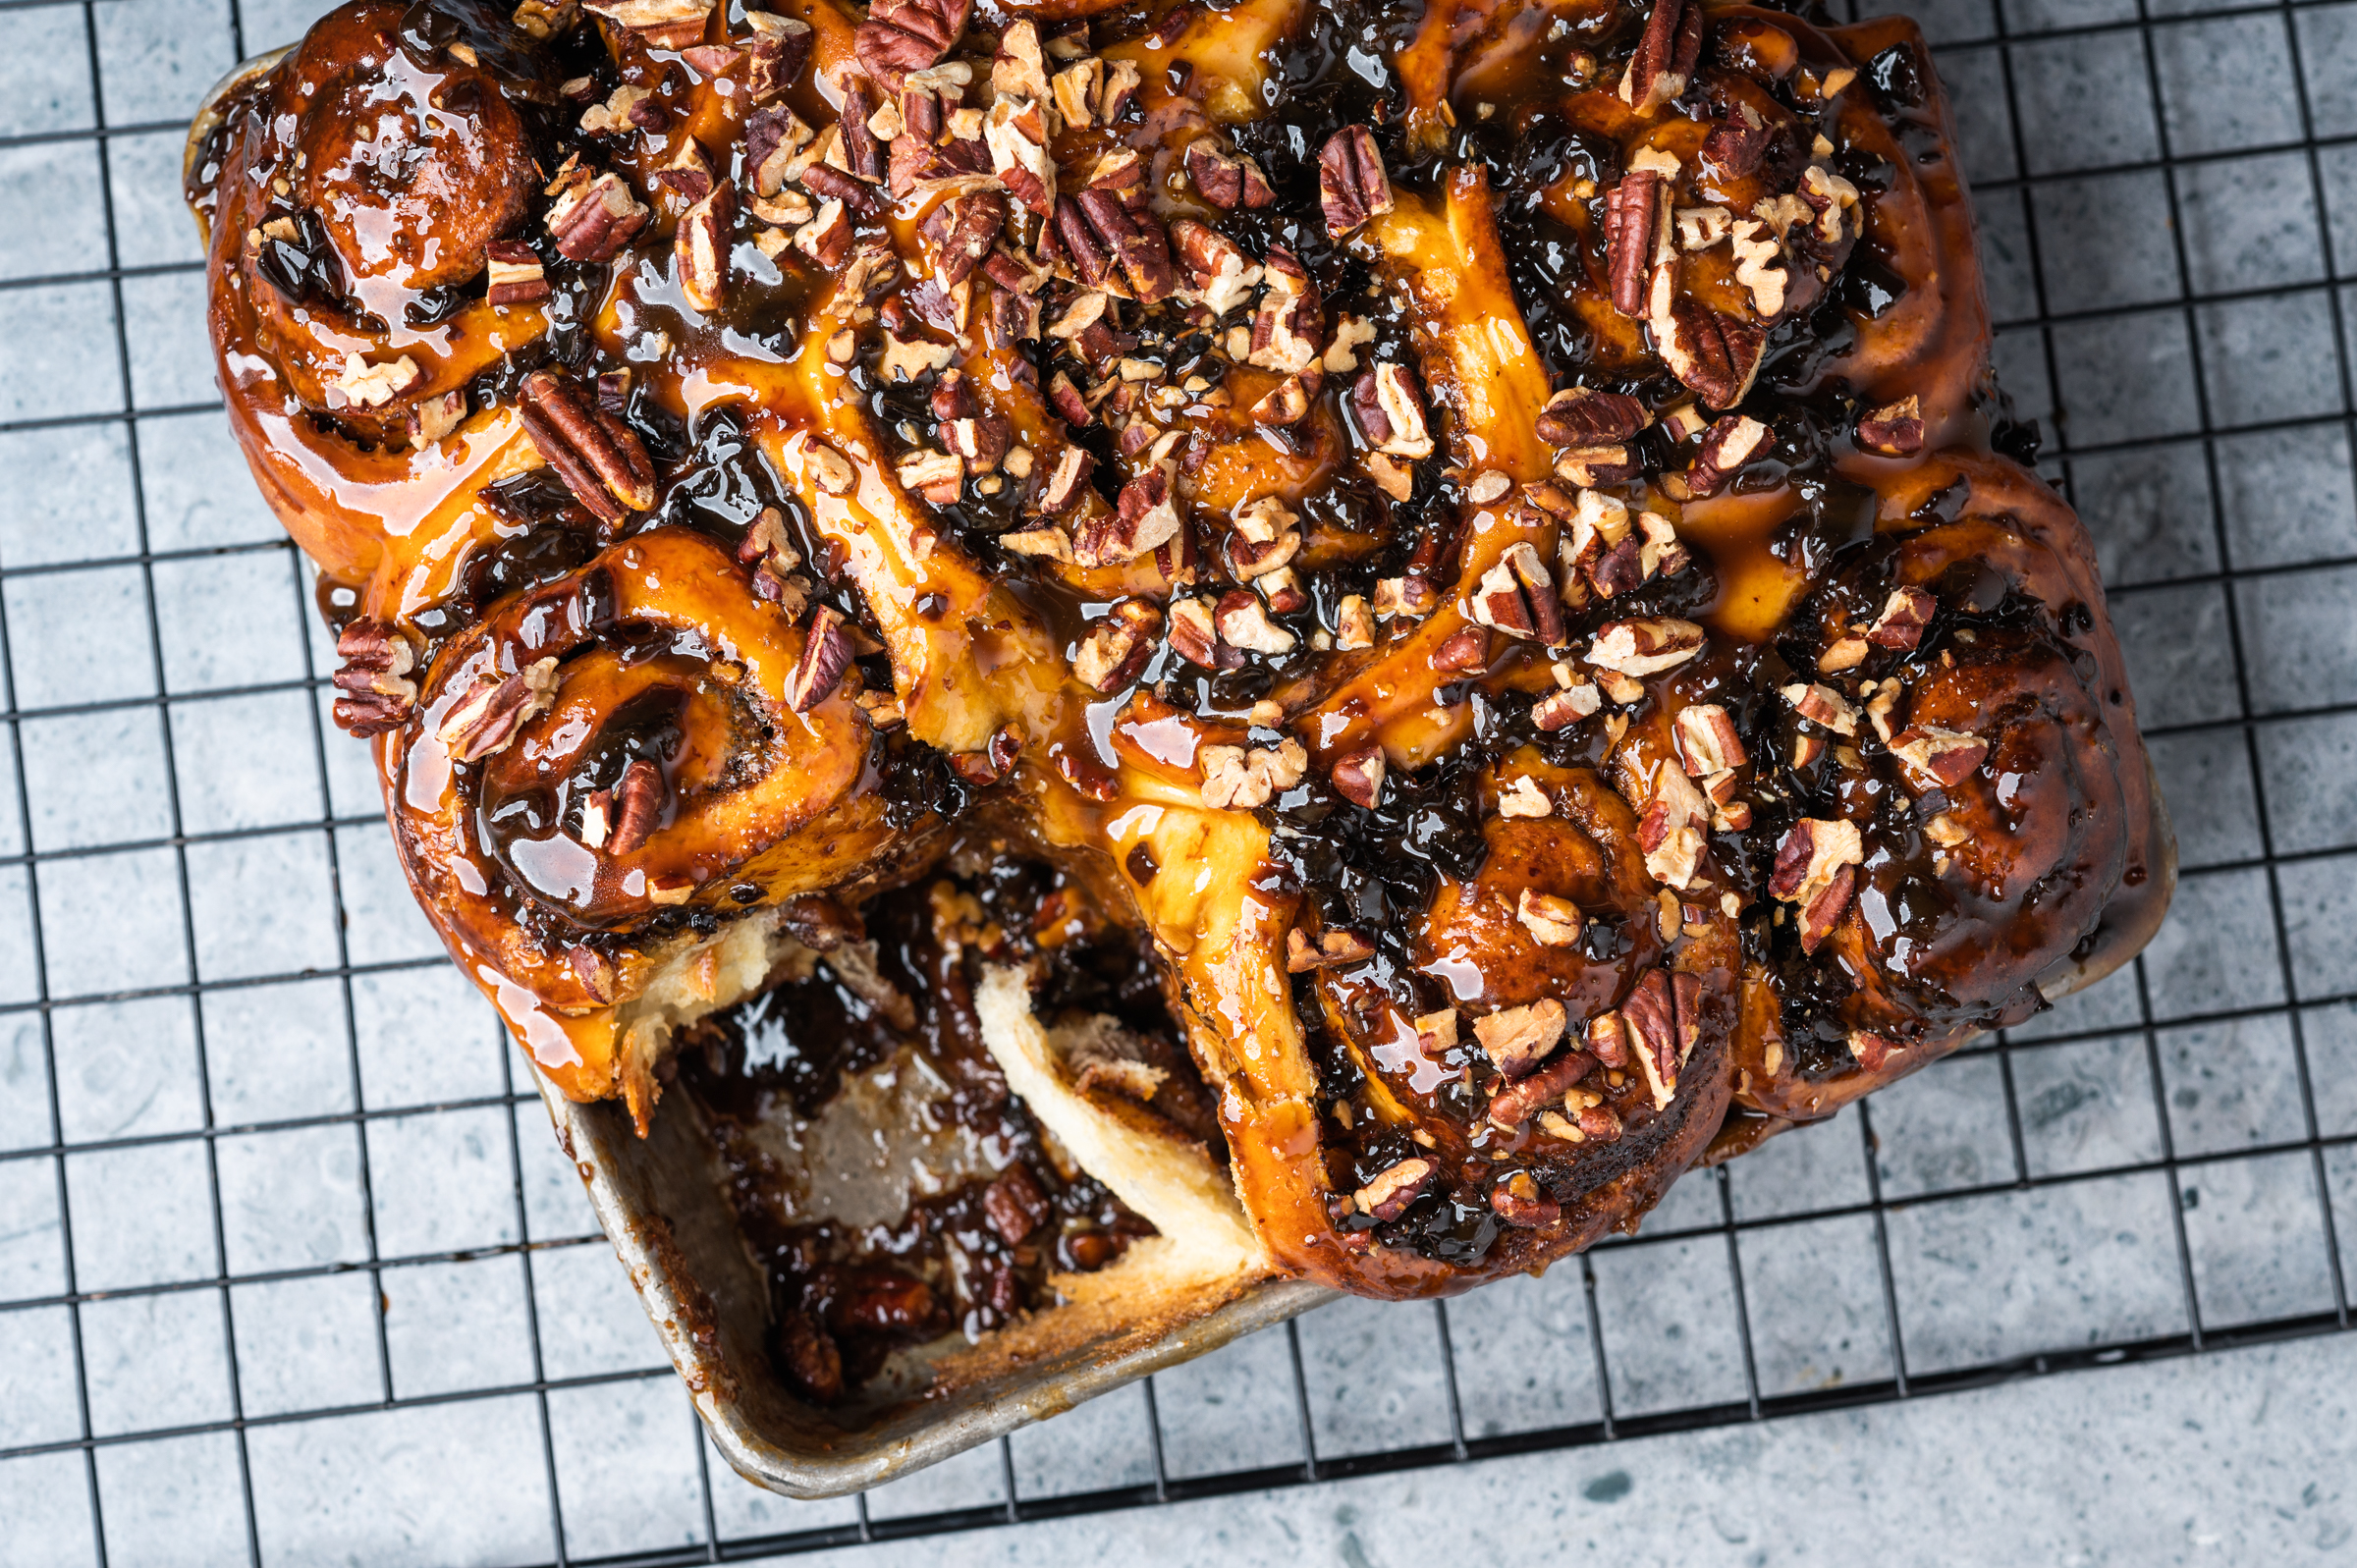 A pan filled with fresh-baked sticky buns